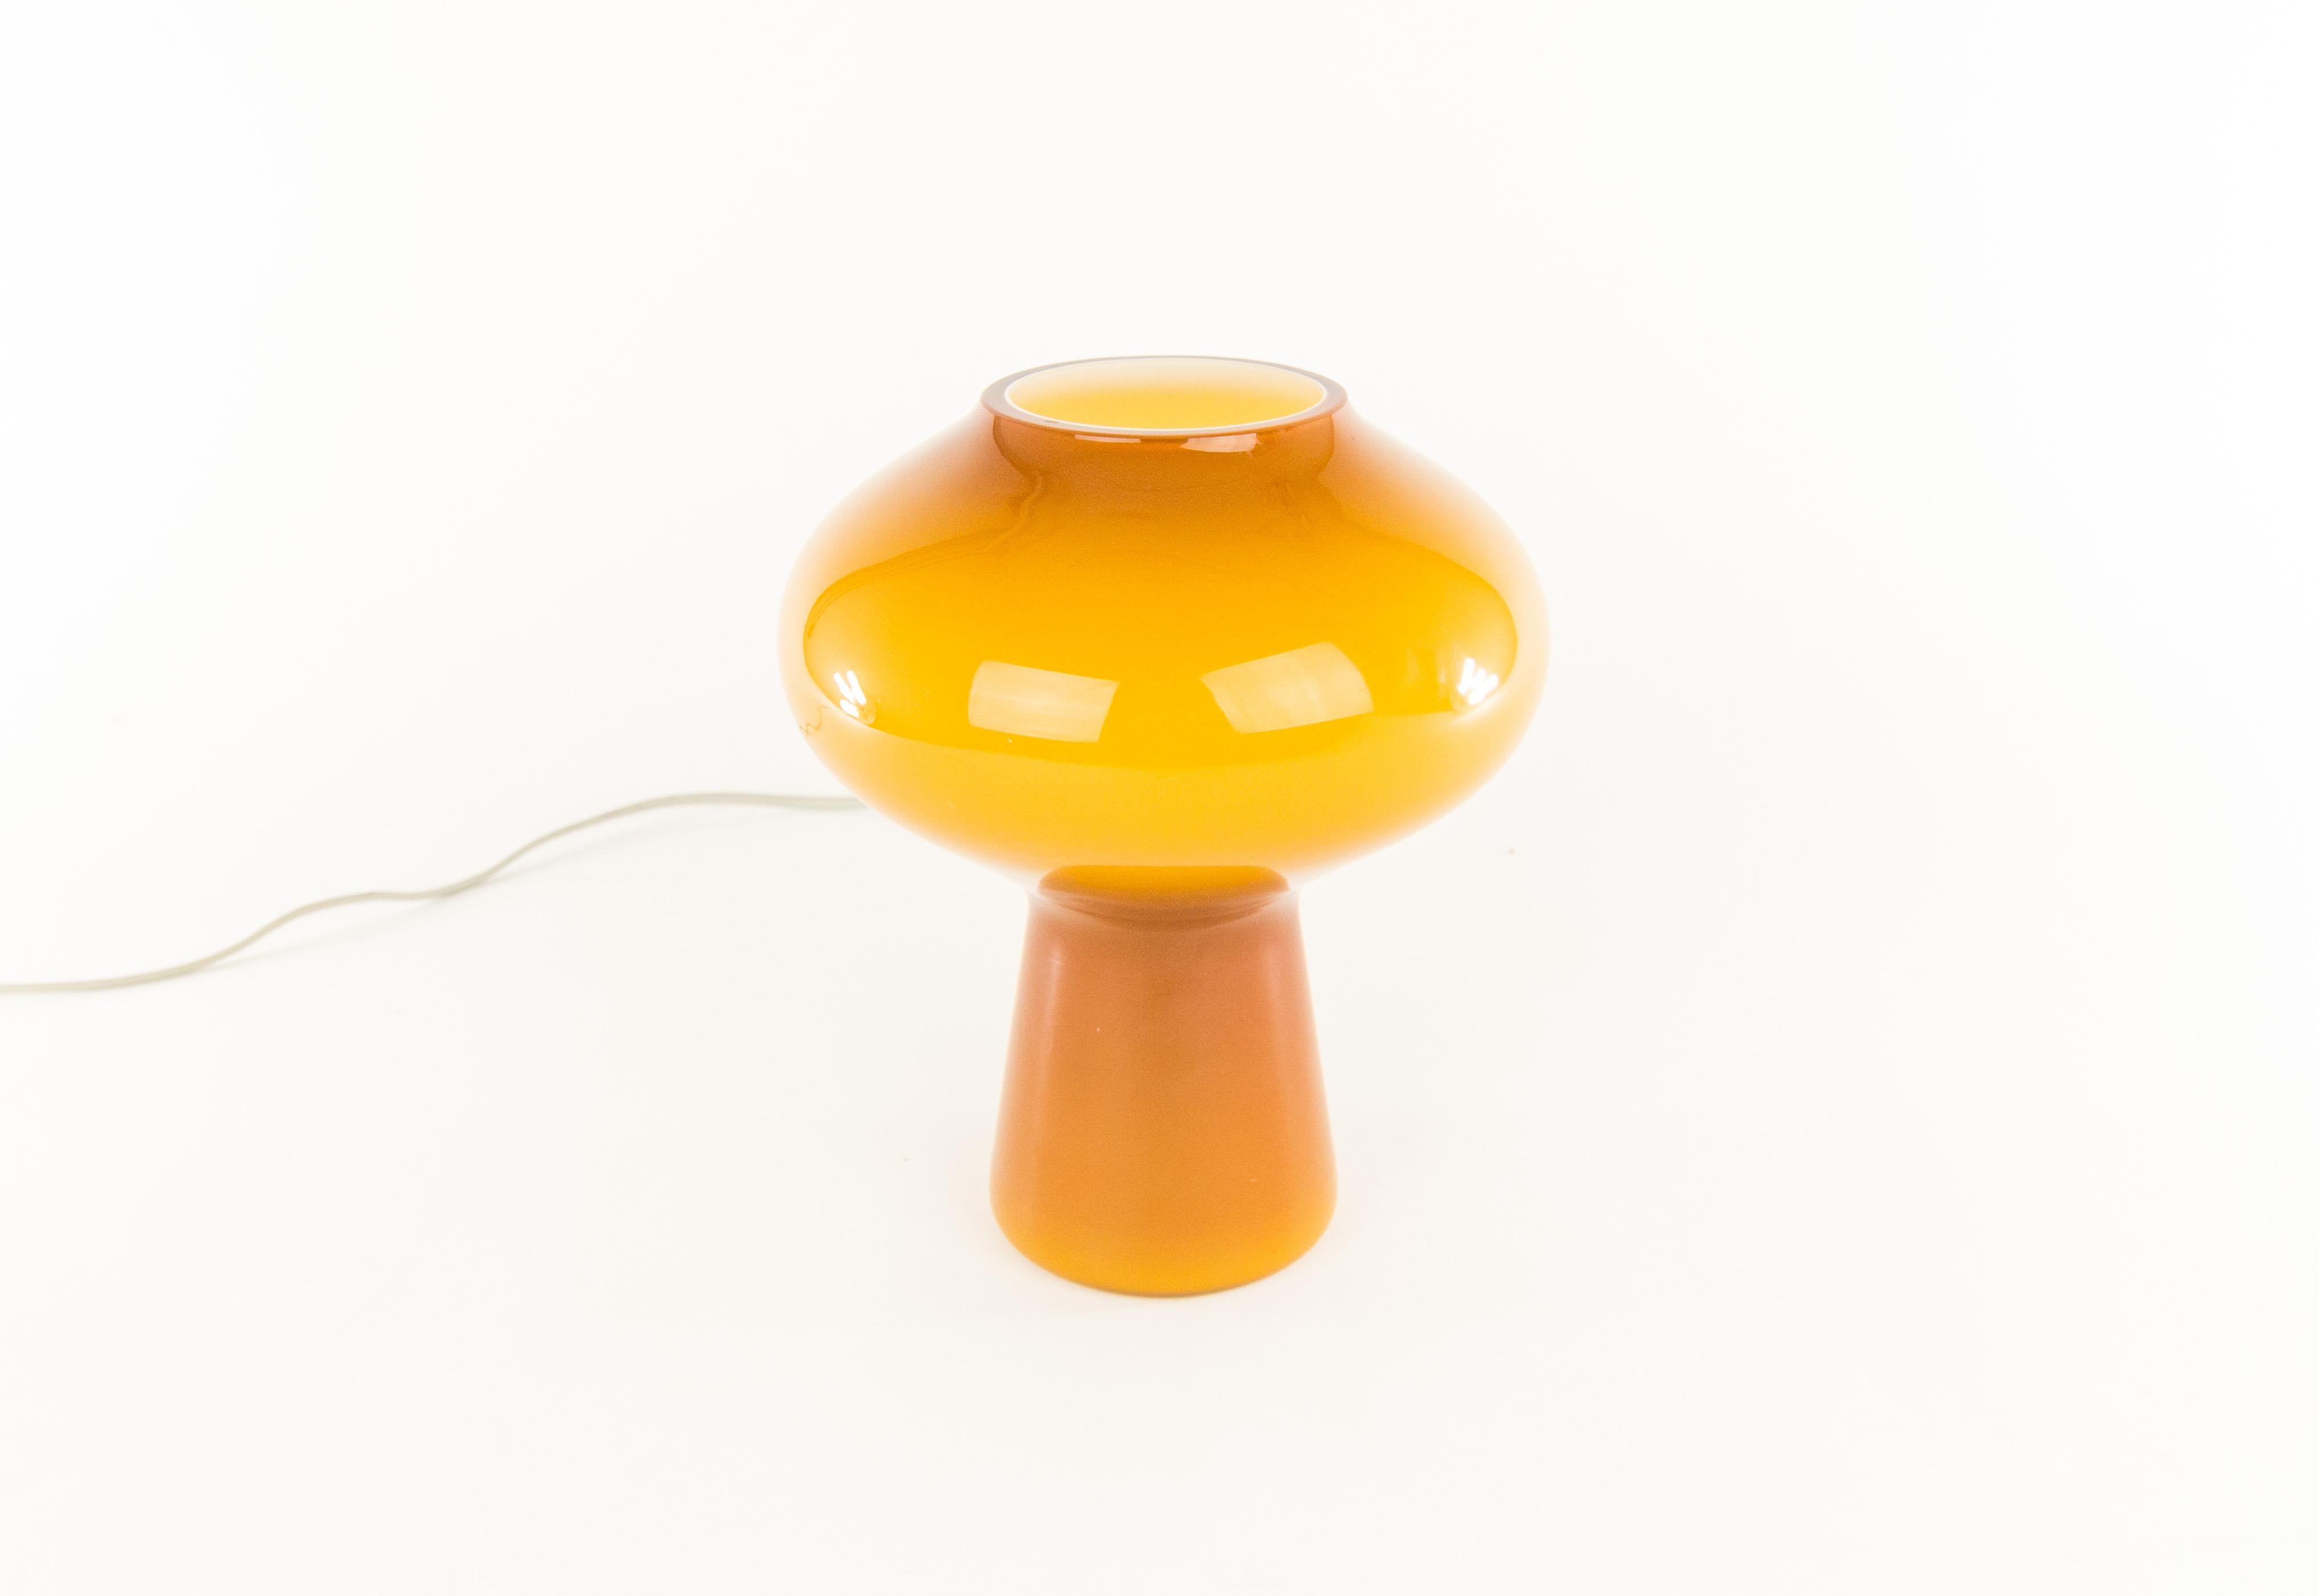 A handblown amber colored glass Fungo table lamp designed by Massimo Vignelli at the start of his impressive career in design and executed by Murano glass specialist Venini.

These lamps were made in various sizes: this is a medium high variant of